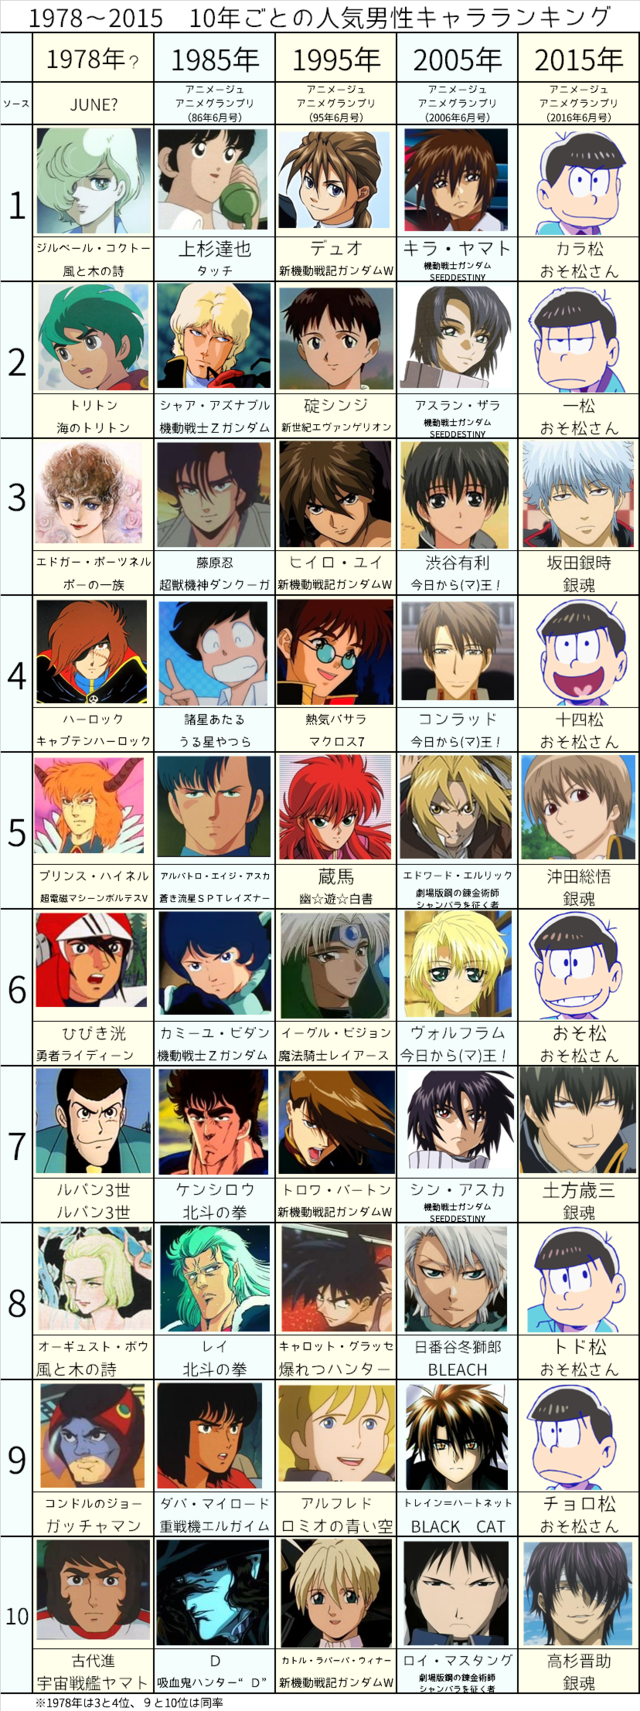 Crunchyroll - See How Anime's Most Popular Male Characters Have Evolved  Over the Last 40 Years